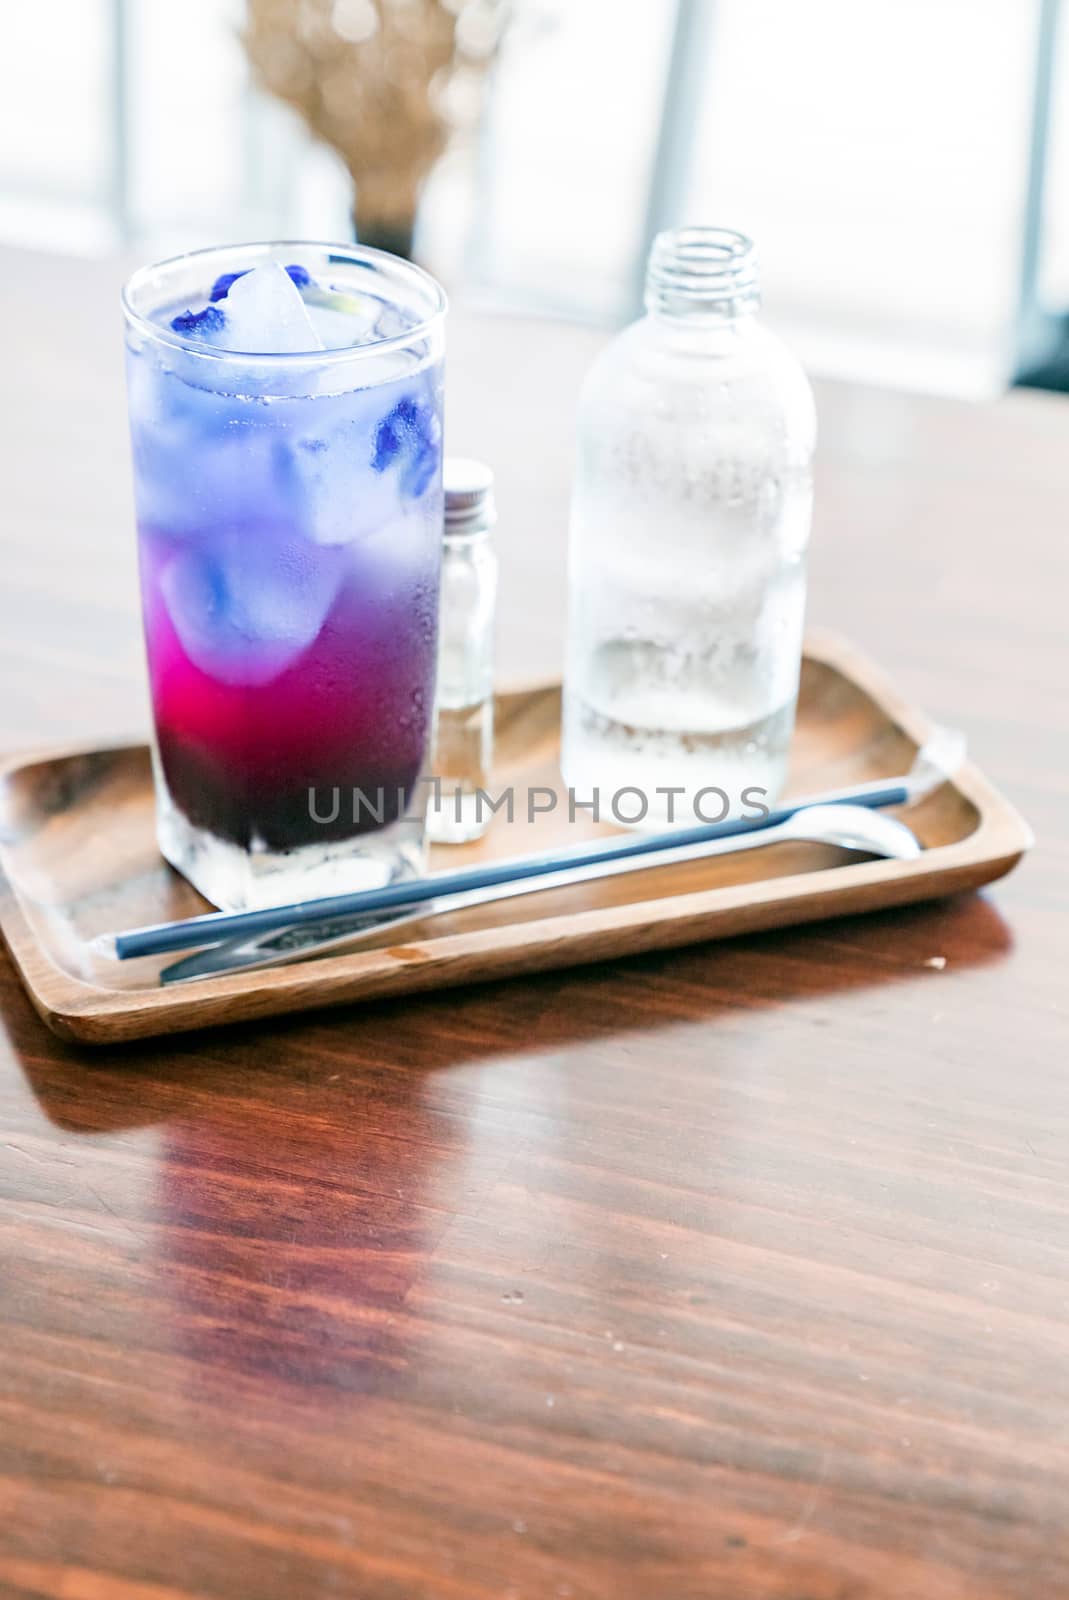 Butterfly pea ice cube by vichie81